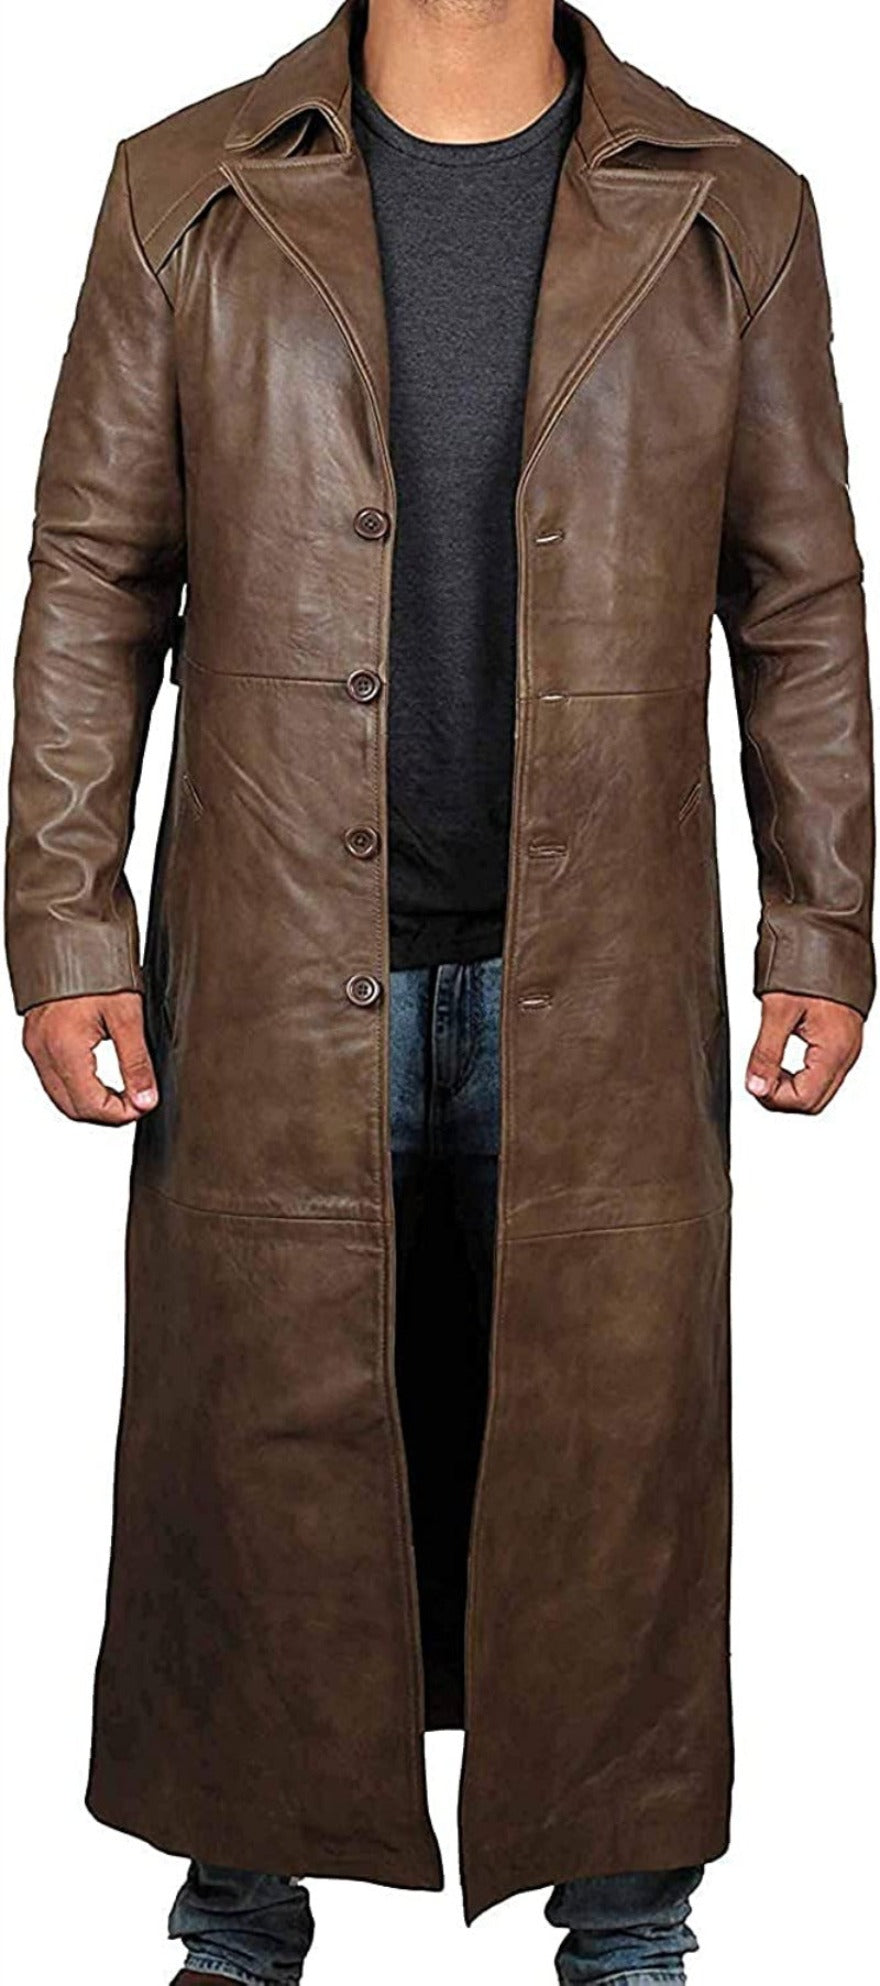 Picture of a model wearing our Mens Brown Leather Trench Coat Full Length, front view unbuttoned.